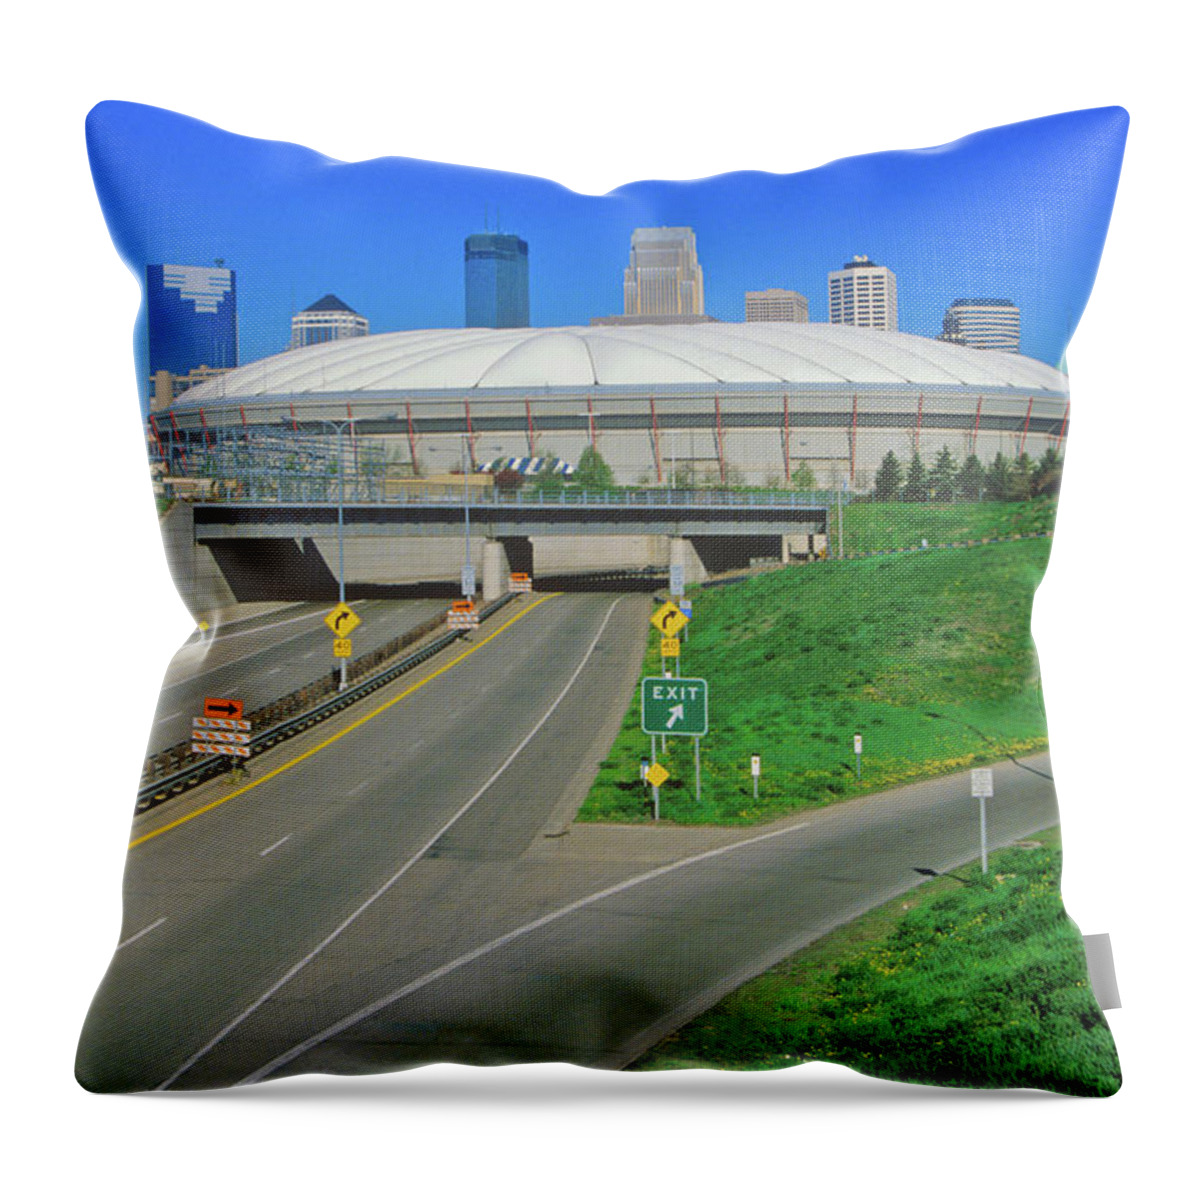 Photography Throw Pillow featuring the photograph Hubert H. Humphrey Metrodome #1 by Panoramic Images